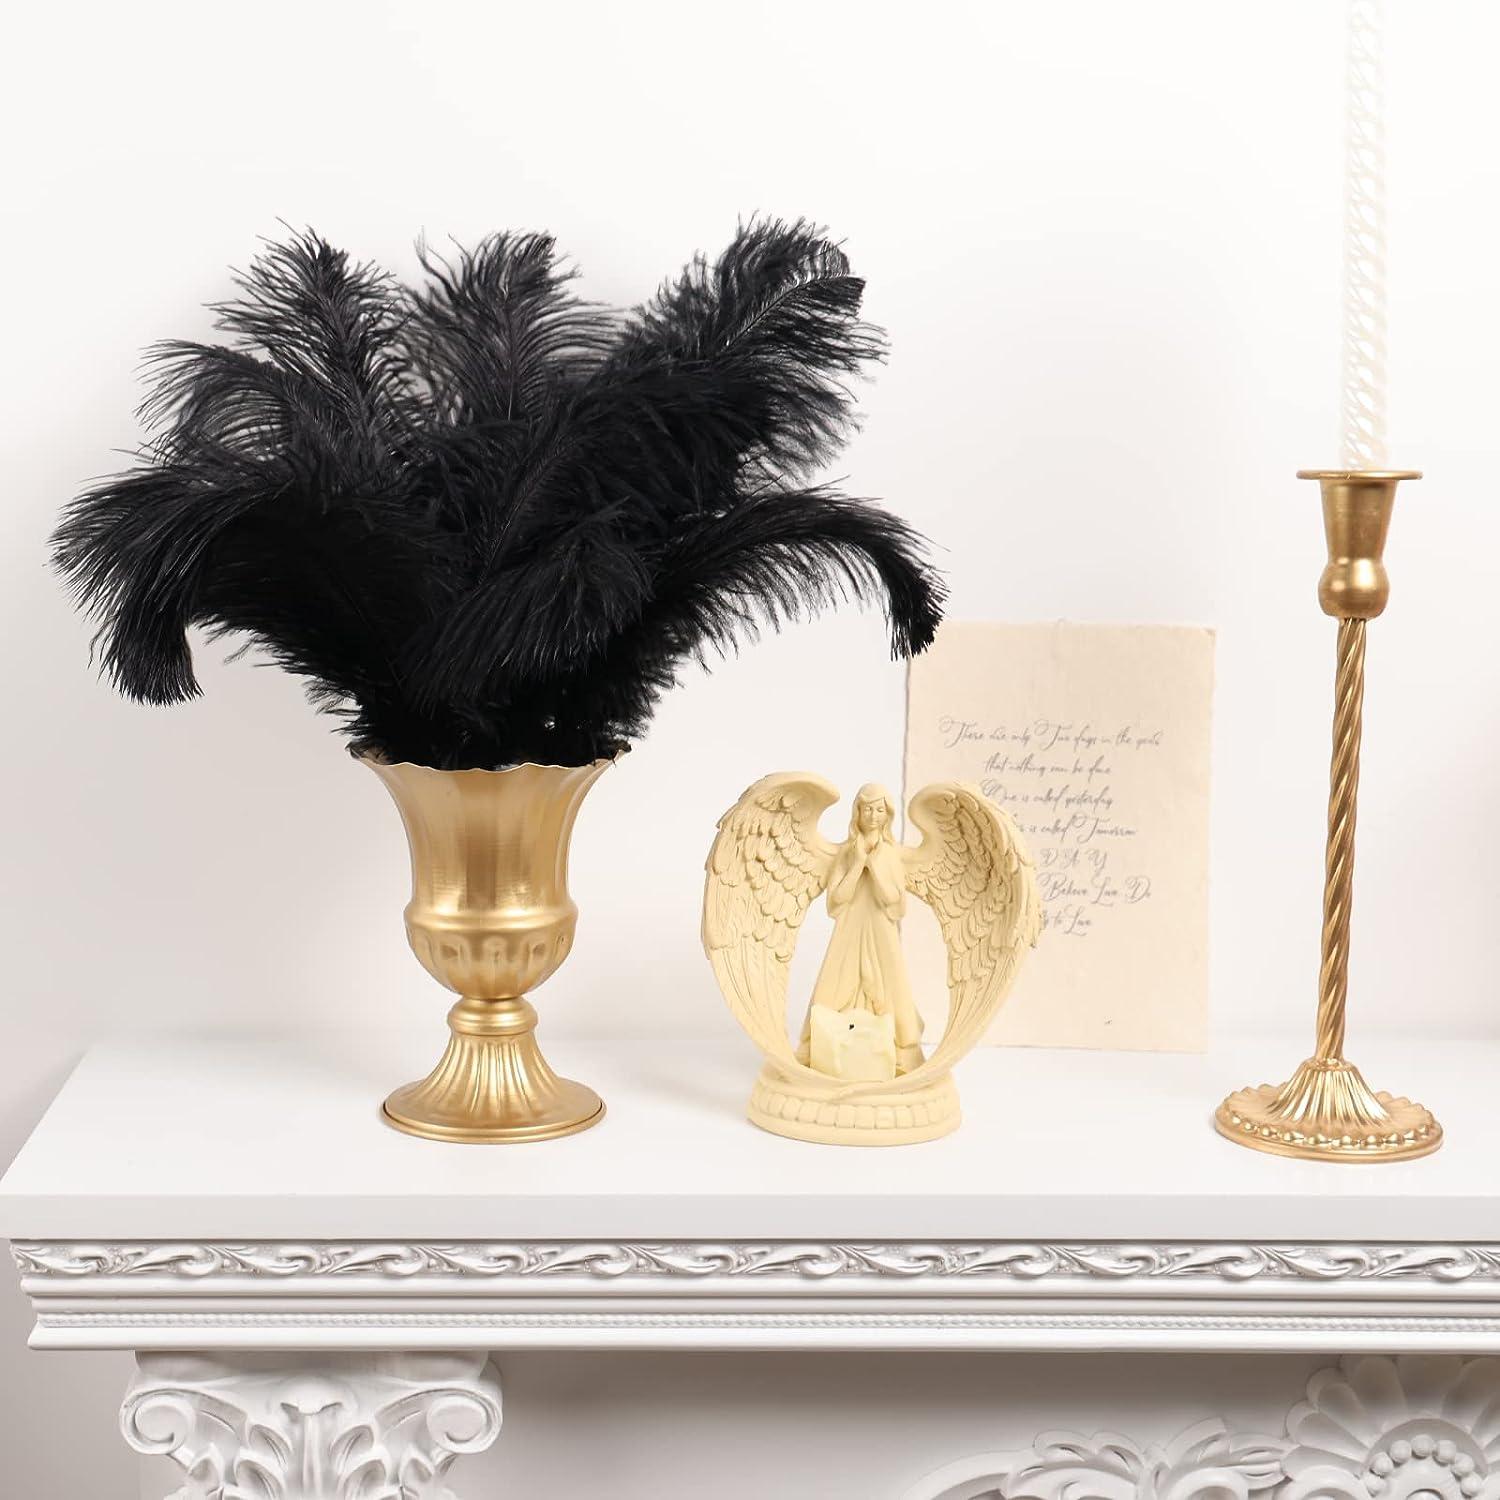 Larryhot Black Ostrich Feathers Bulk - 16-18 inch 10pcs Feathers for  Vase,Wedding Party Centerpieces and Home Decorations (Black)